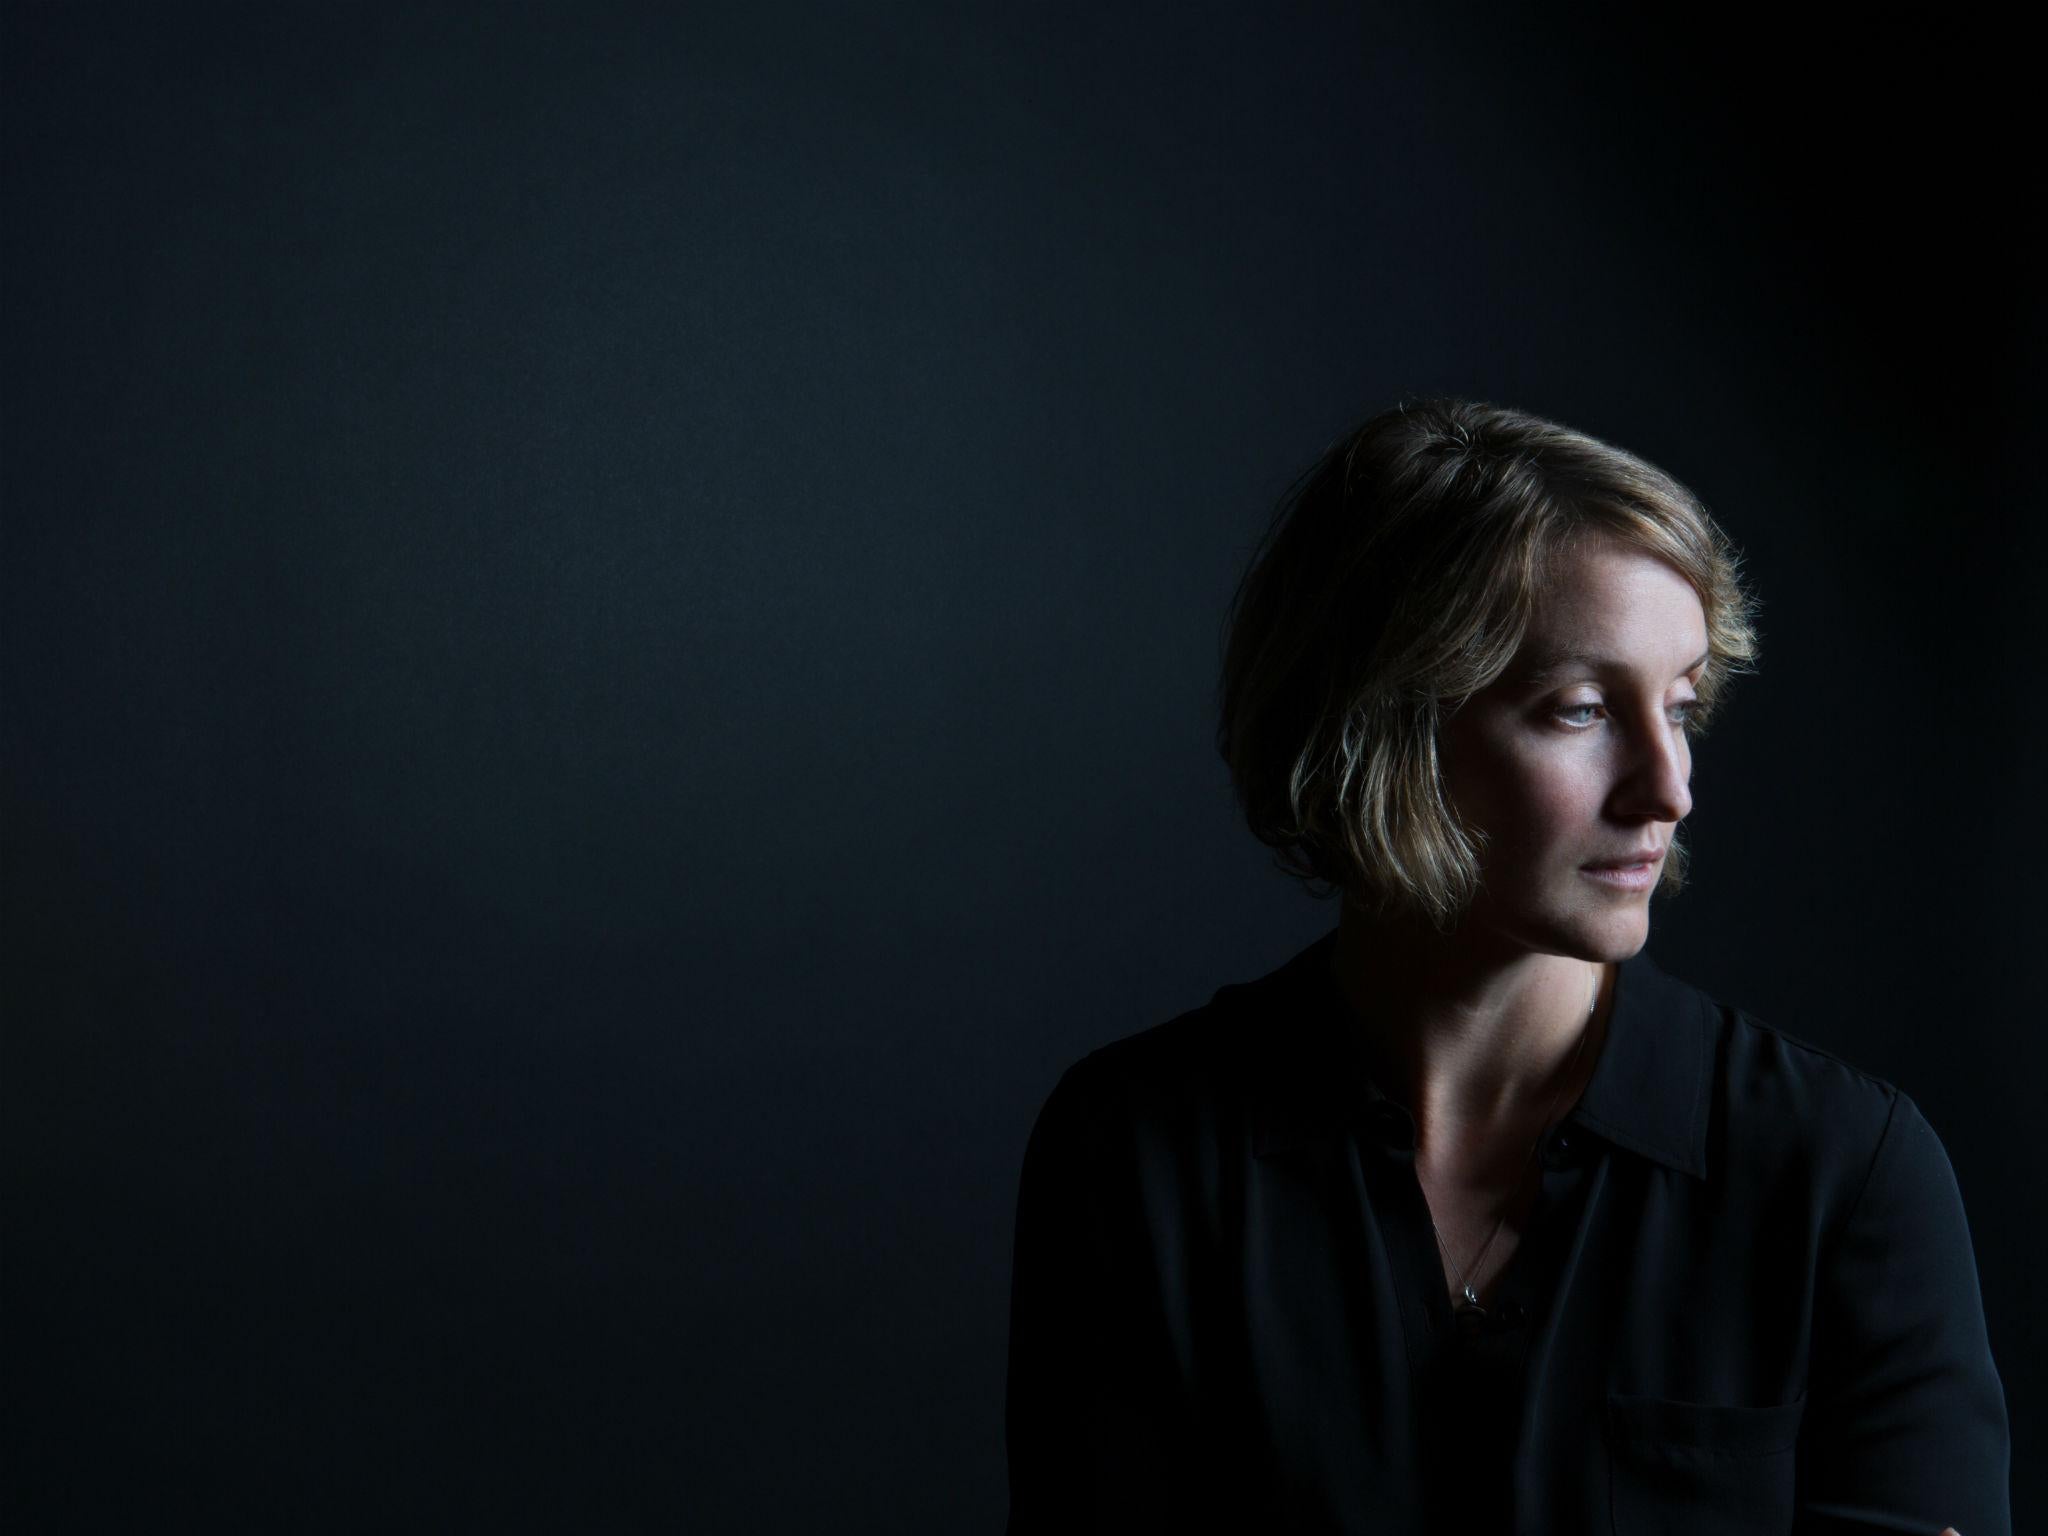 The singer Joan Shelley has released her fourth self-titled album